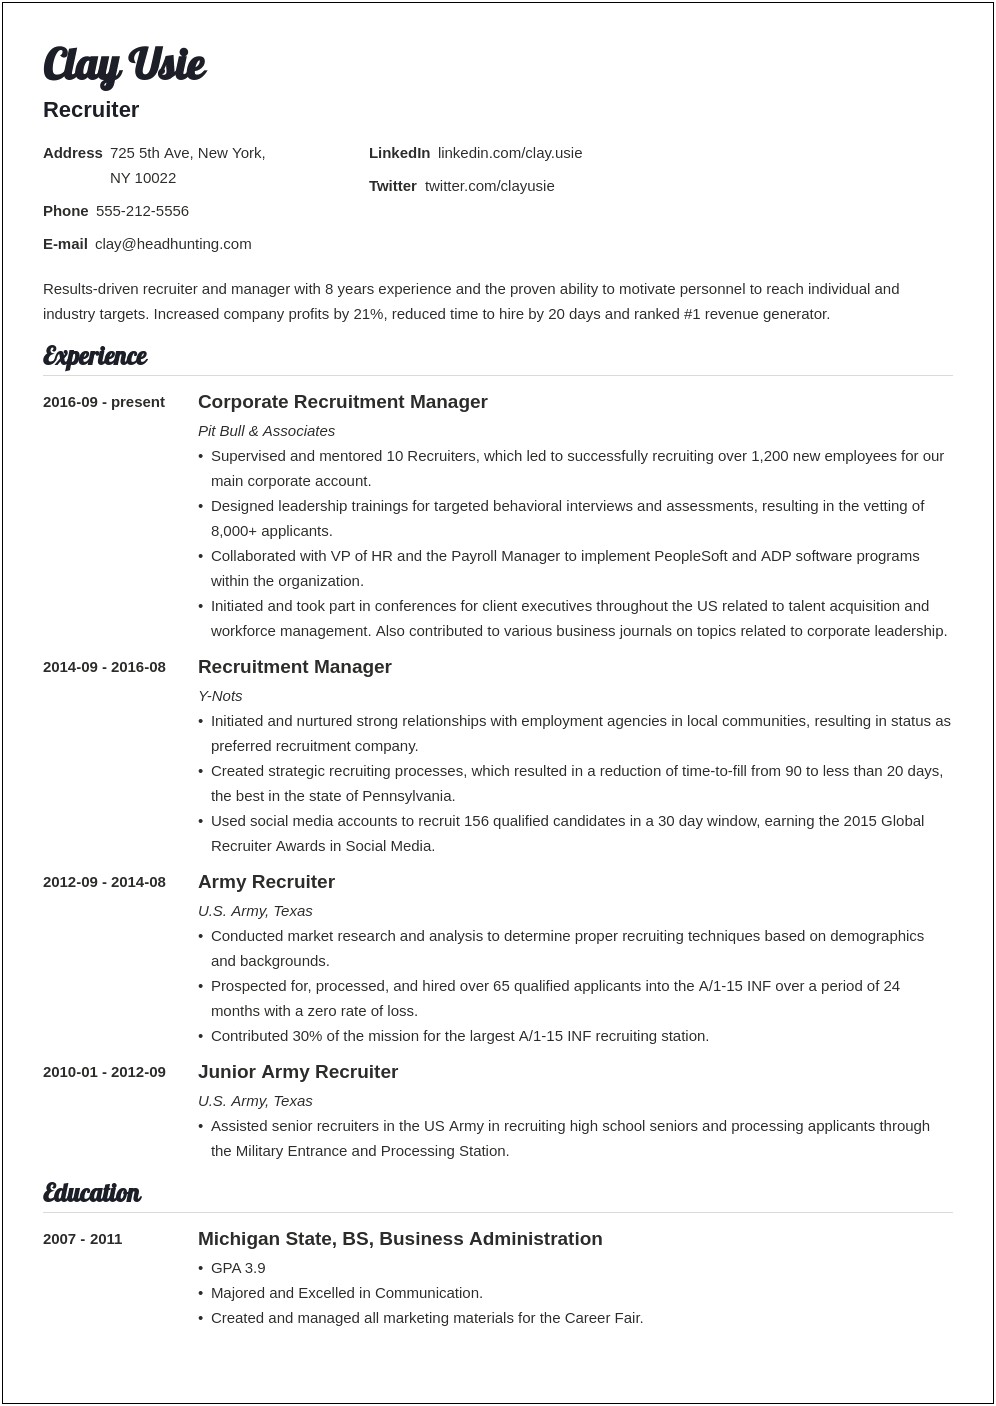 Resume Summary Objective For Recruiter